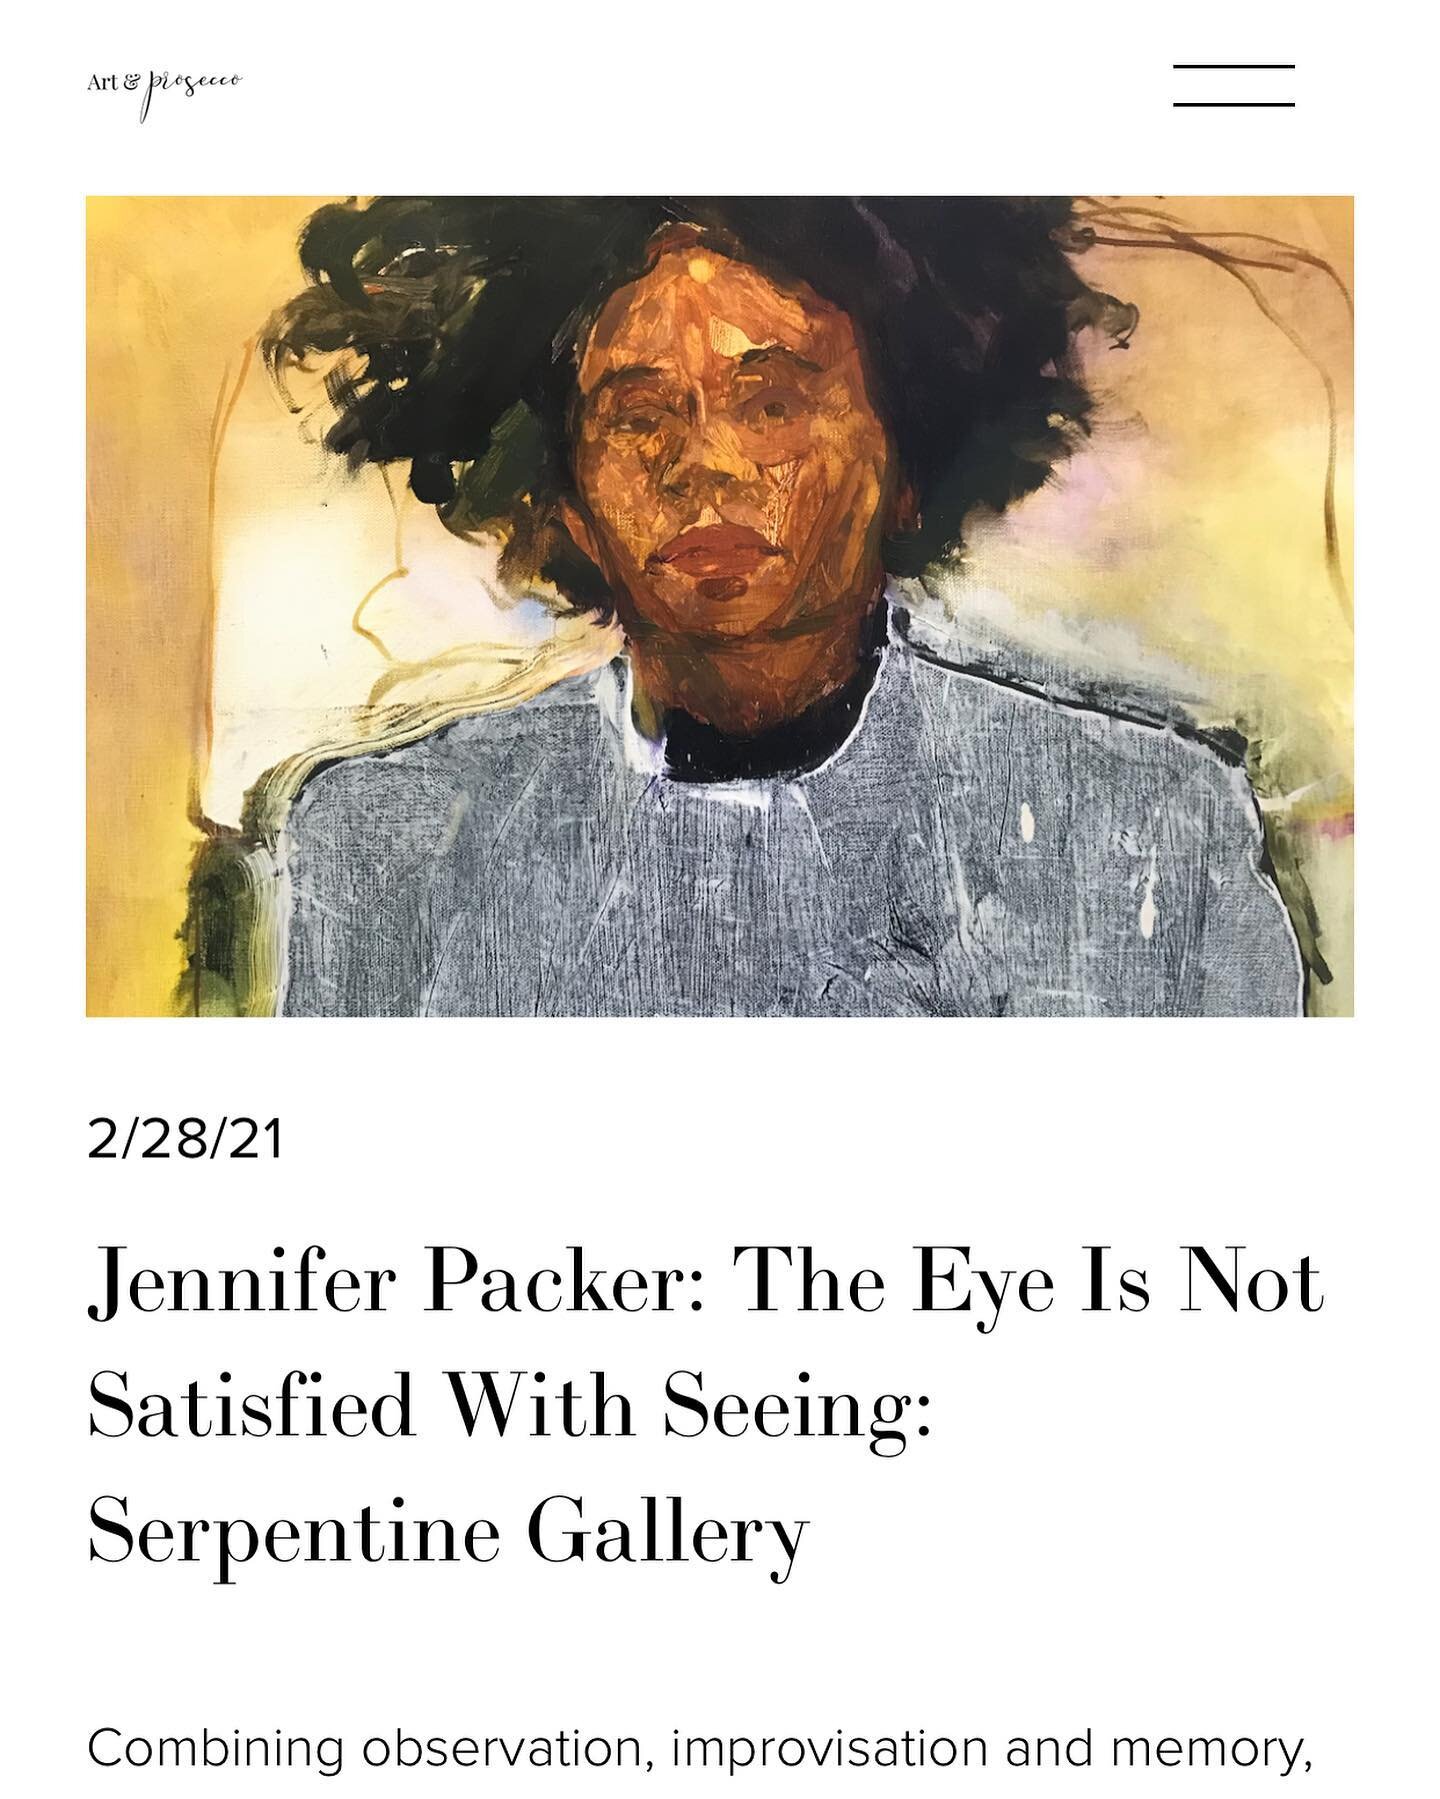 As it is the last of black history month. We&rsquo;ve written a blog post over on our website when we visited the @serpentineuk which showcased the talented works by #jenniferpacker. 

&lsquo;The eyes are not satisfied with seeing&rsquo; powerful exh